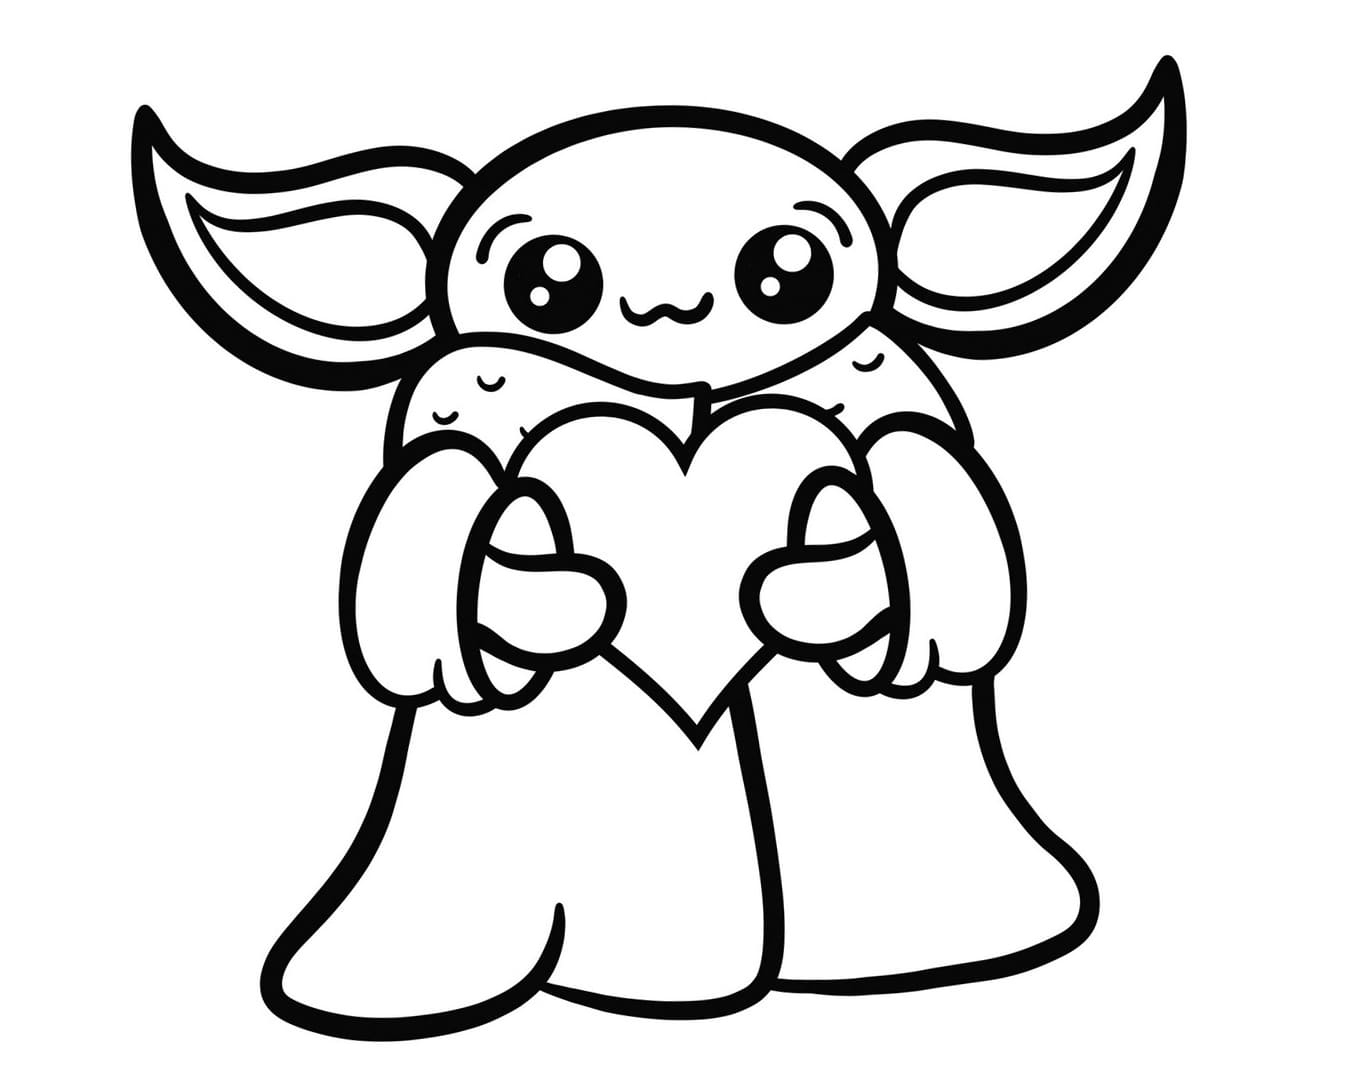 Coloring page Baby Yoda With a heart in his hands